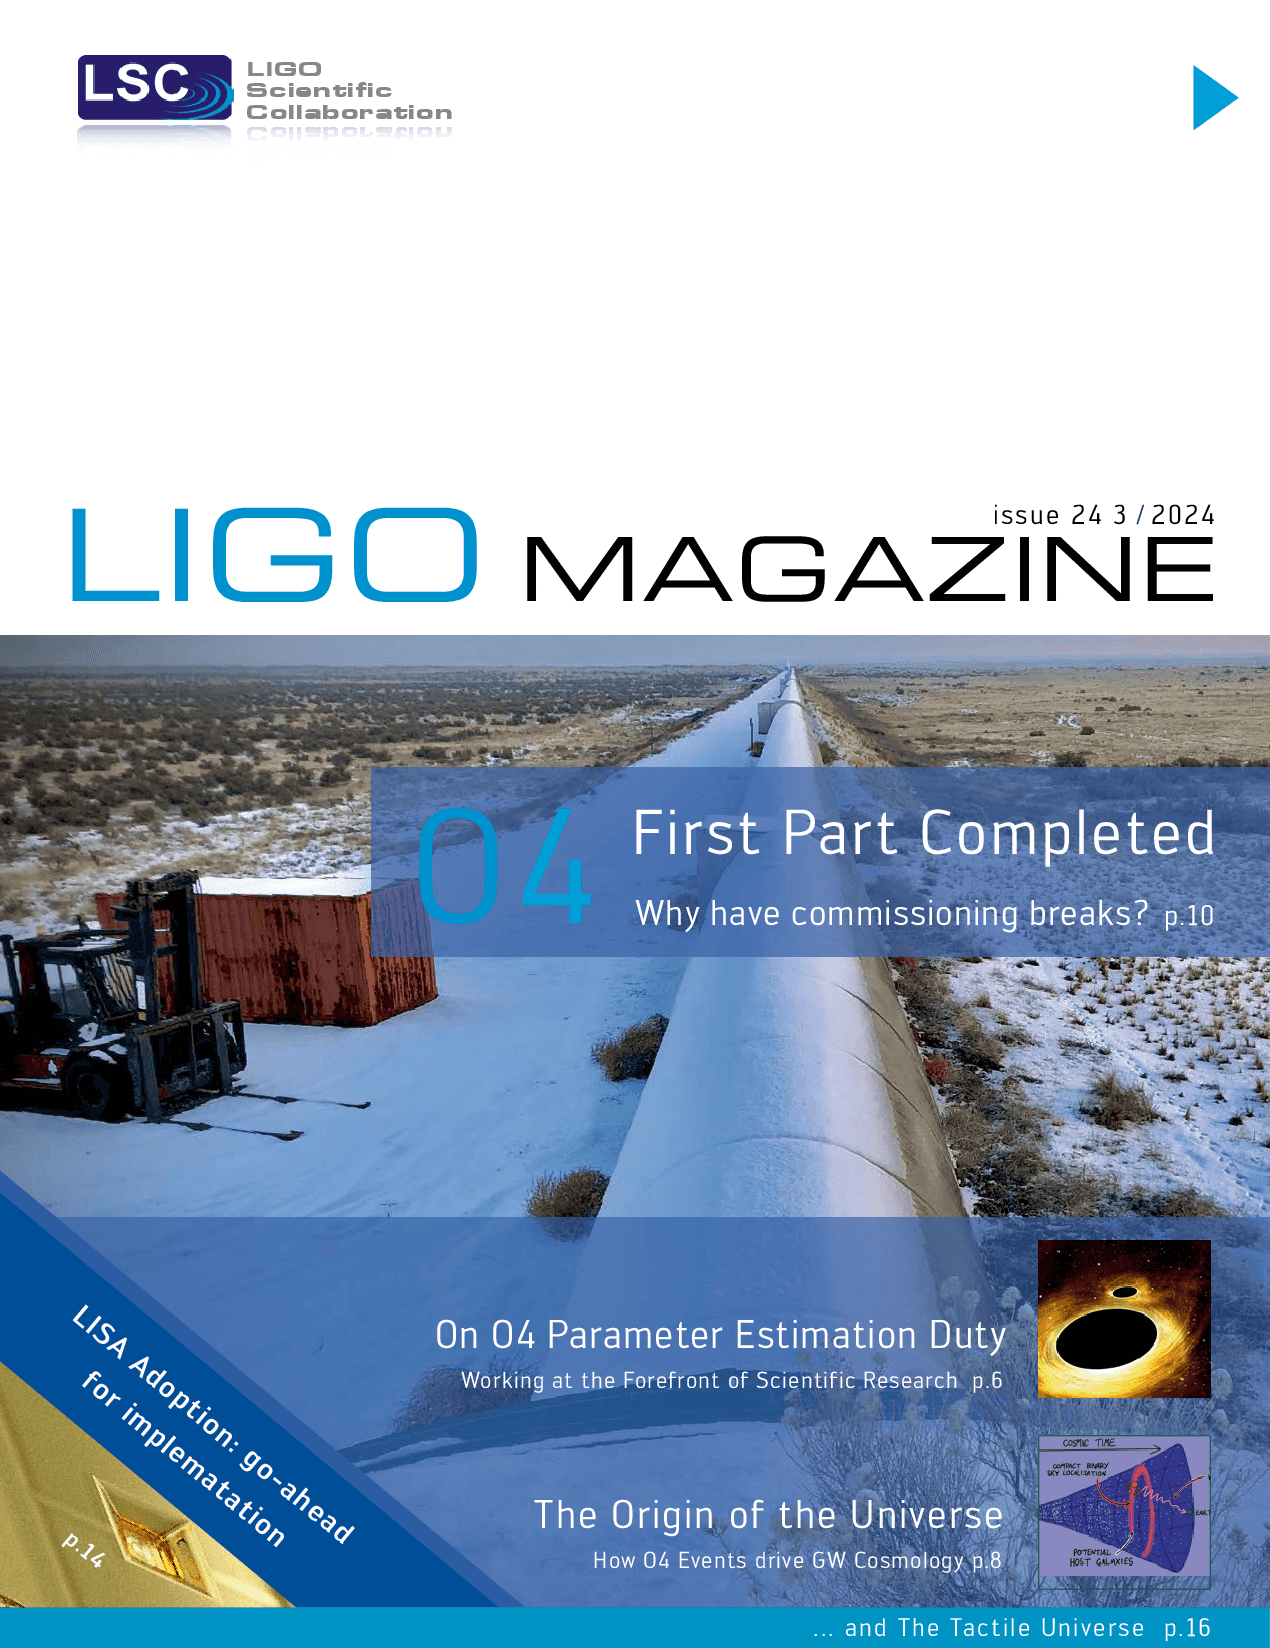 News-Image 2 of: New LIGO Magazine Issue 24 is out!